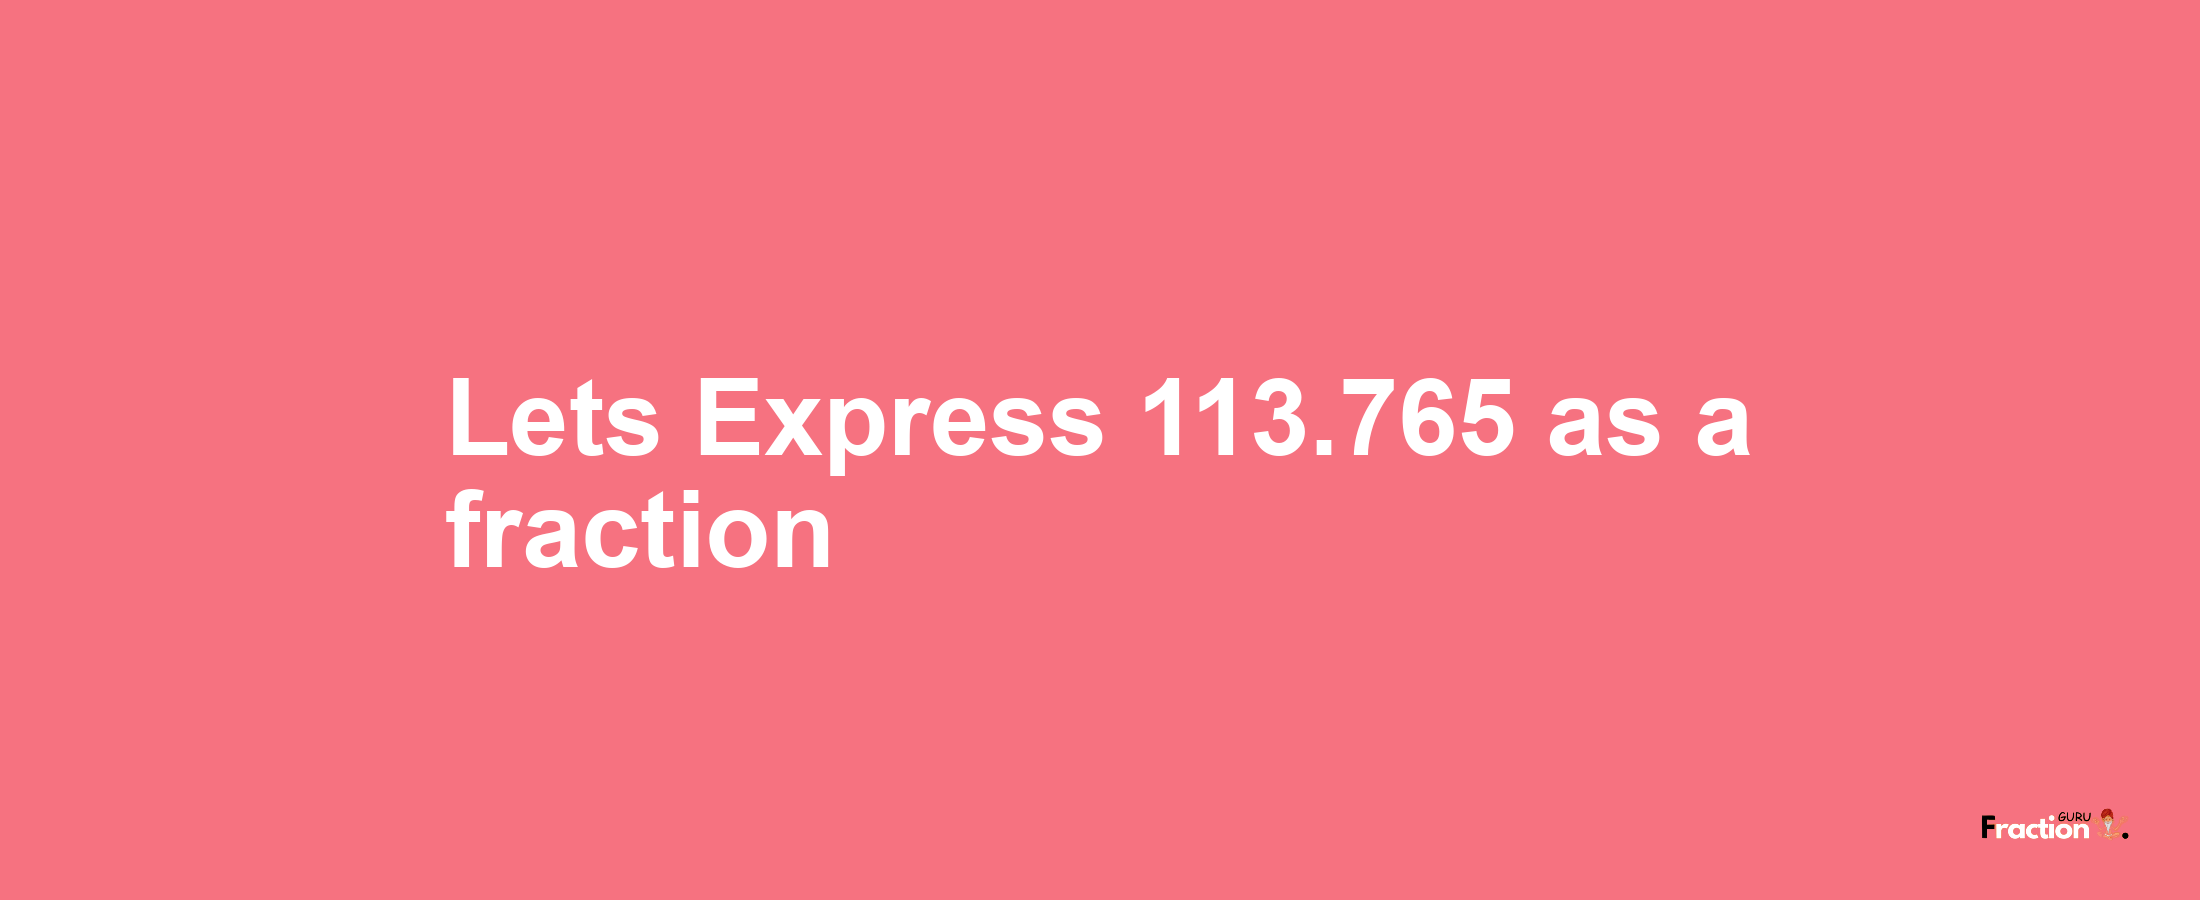 Lets Express 113.765 as afraction